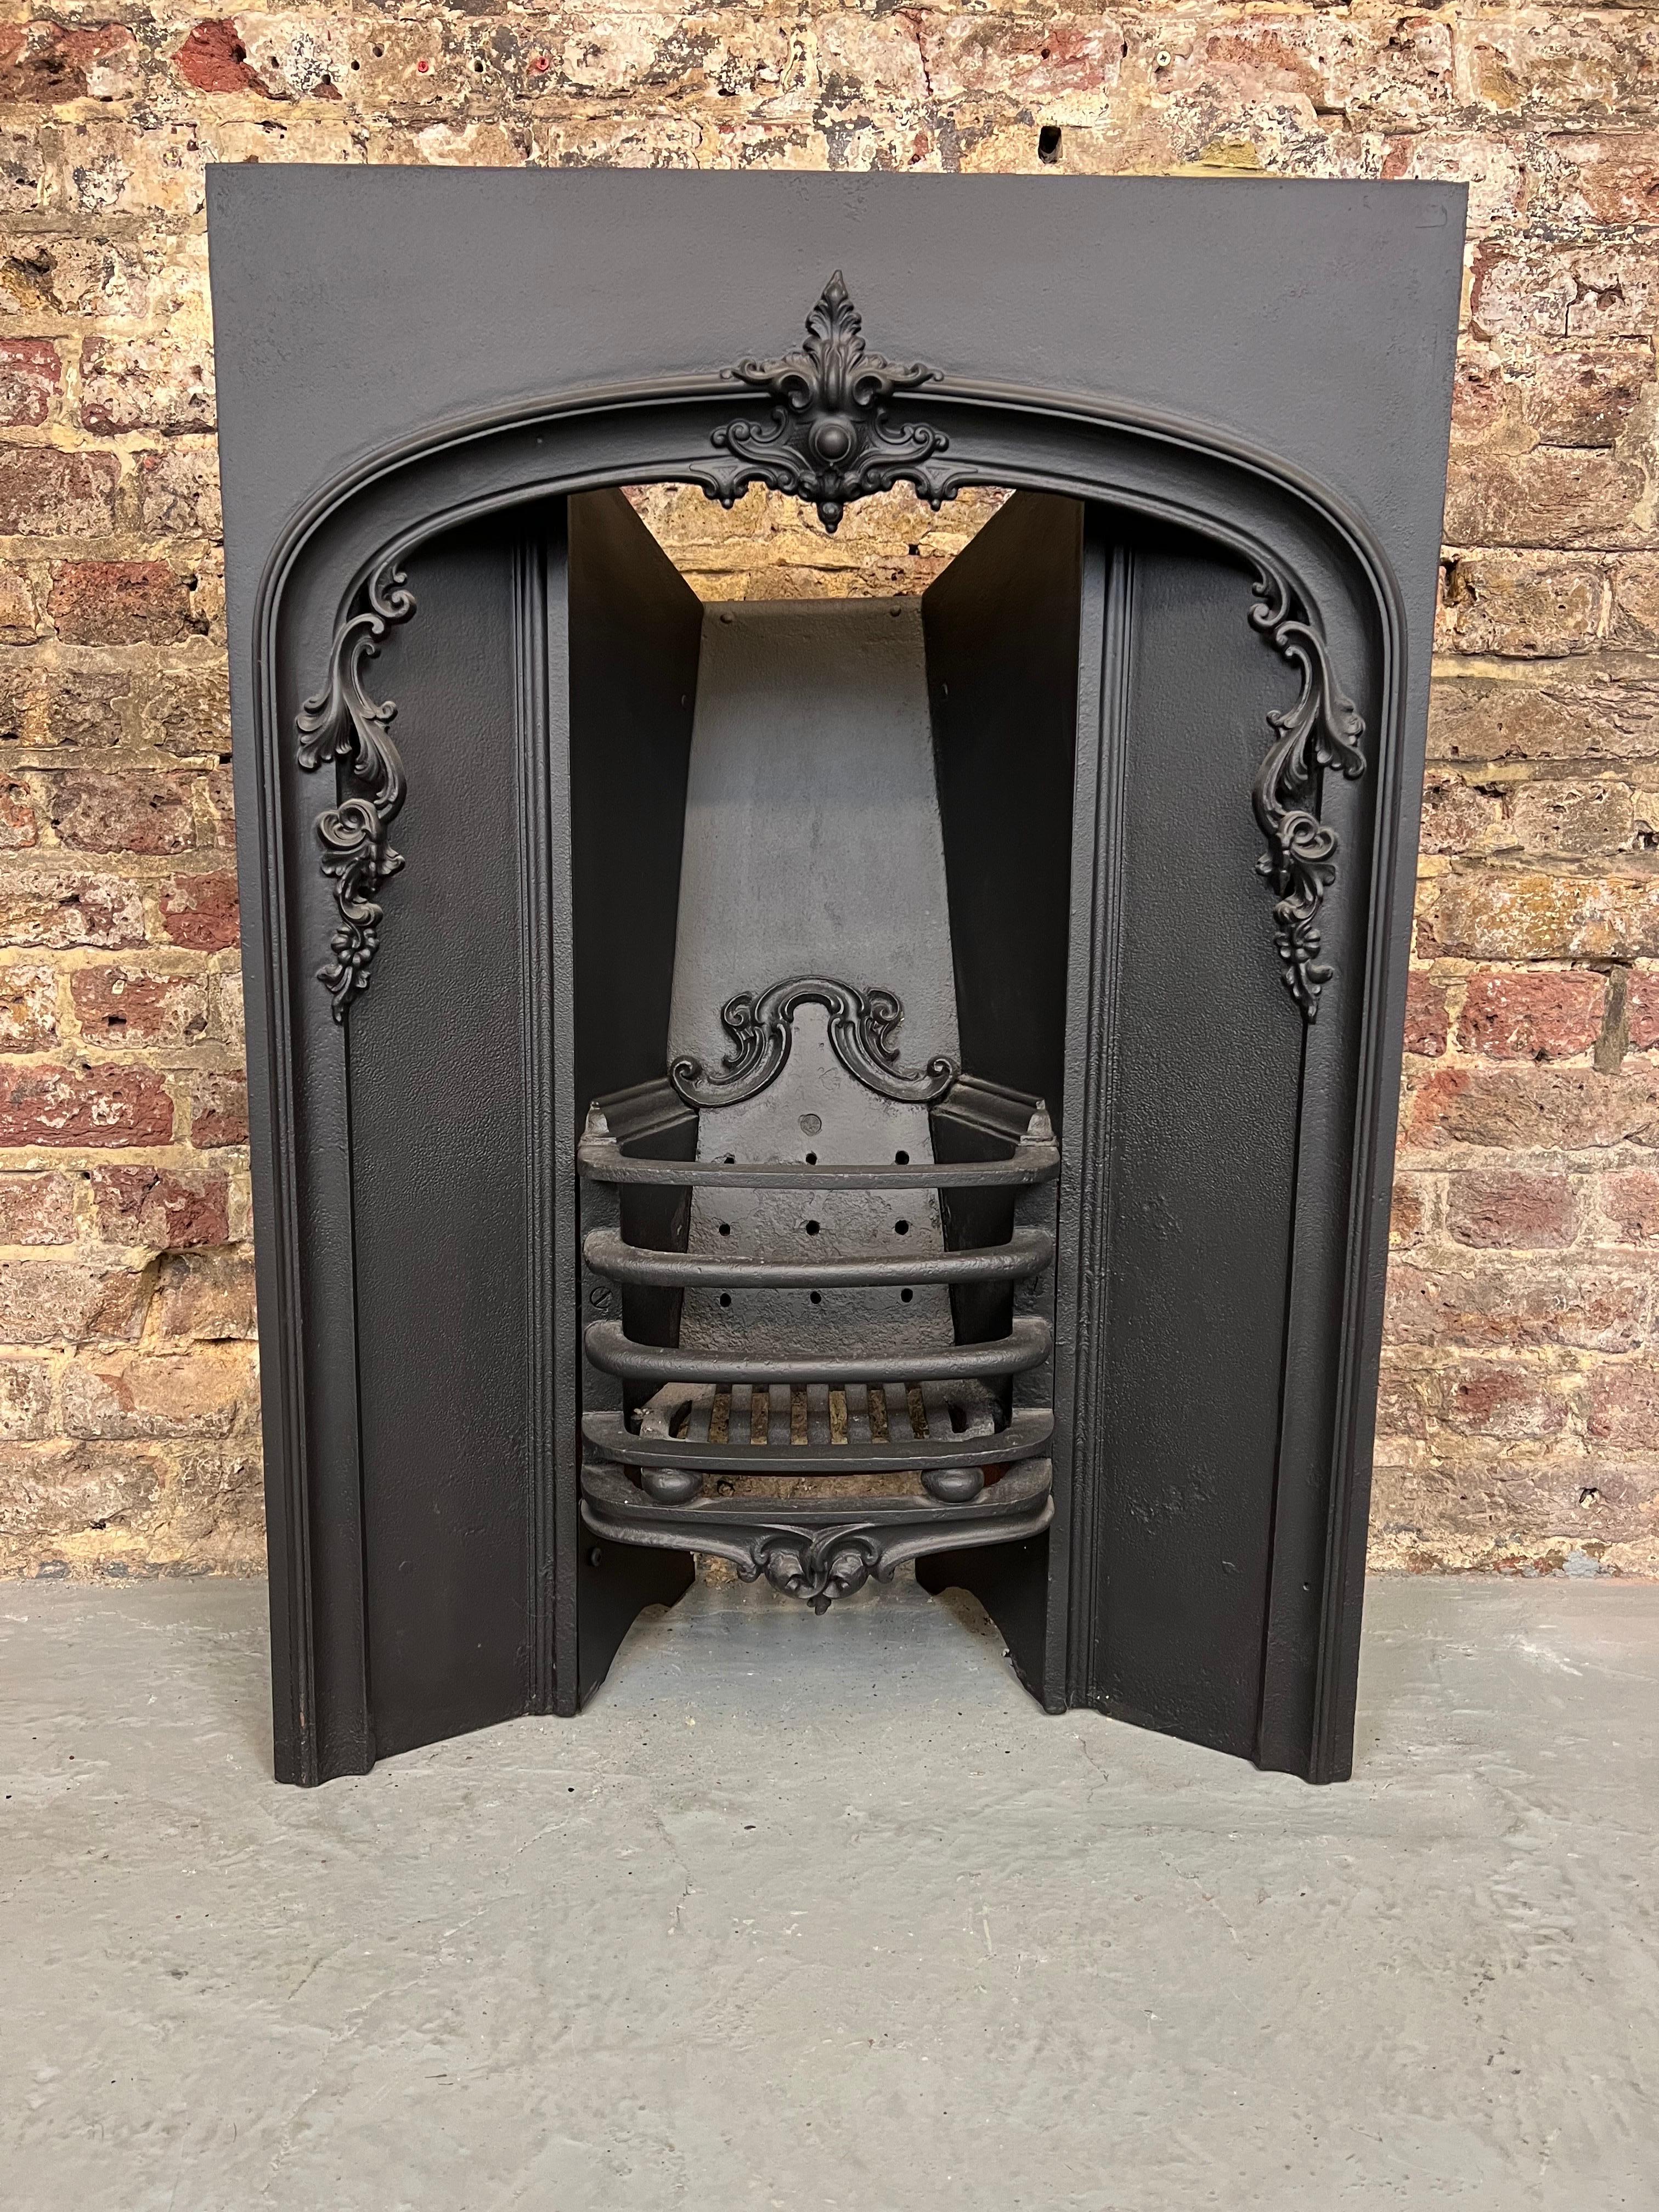 19th Century Cast Iron Fireplace Insert
English Made Circa 1880 From The Victorian Period.
This Classic Original Arched Fireplace Insert  With Decorative Cast Relief Is Complete With Deorative Fire Back & Front Bars.
In Traditional Blackened Finish.